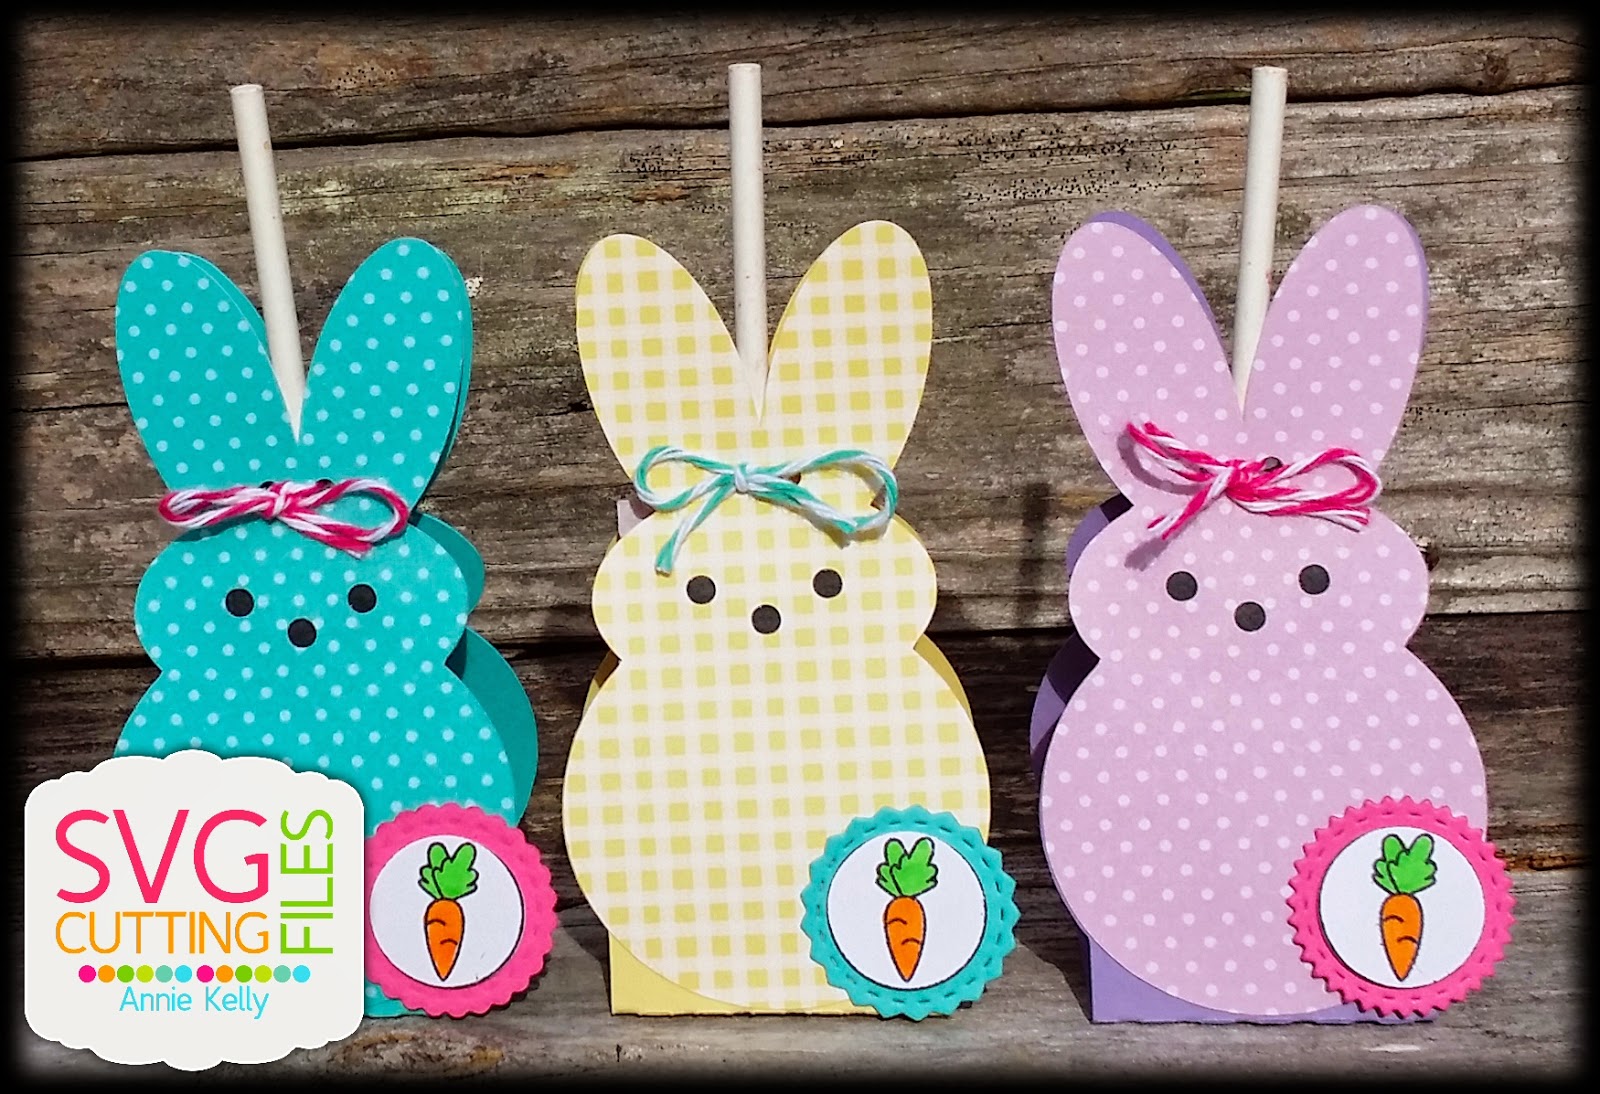 SVG Cutting Files: Spring Chick/Bunny Lollipop Covers!